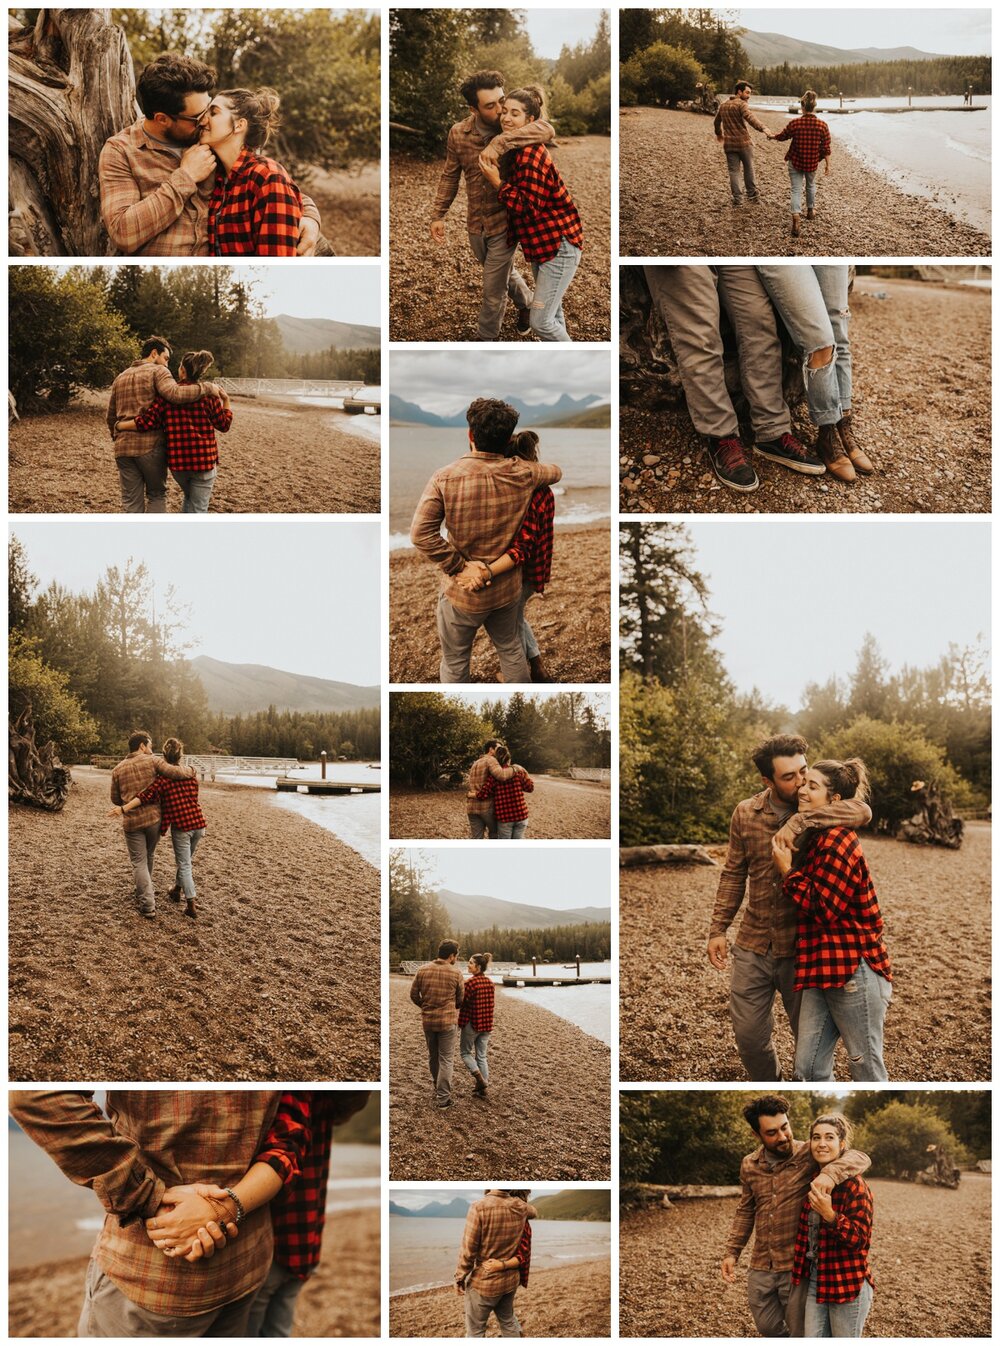 How precious are they? Snuggles are a must for any engagement session. Especially when they’re wearing cozy flannels like these!